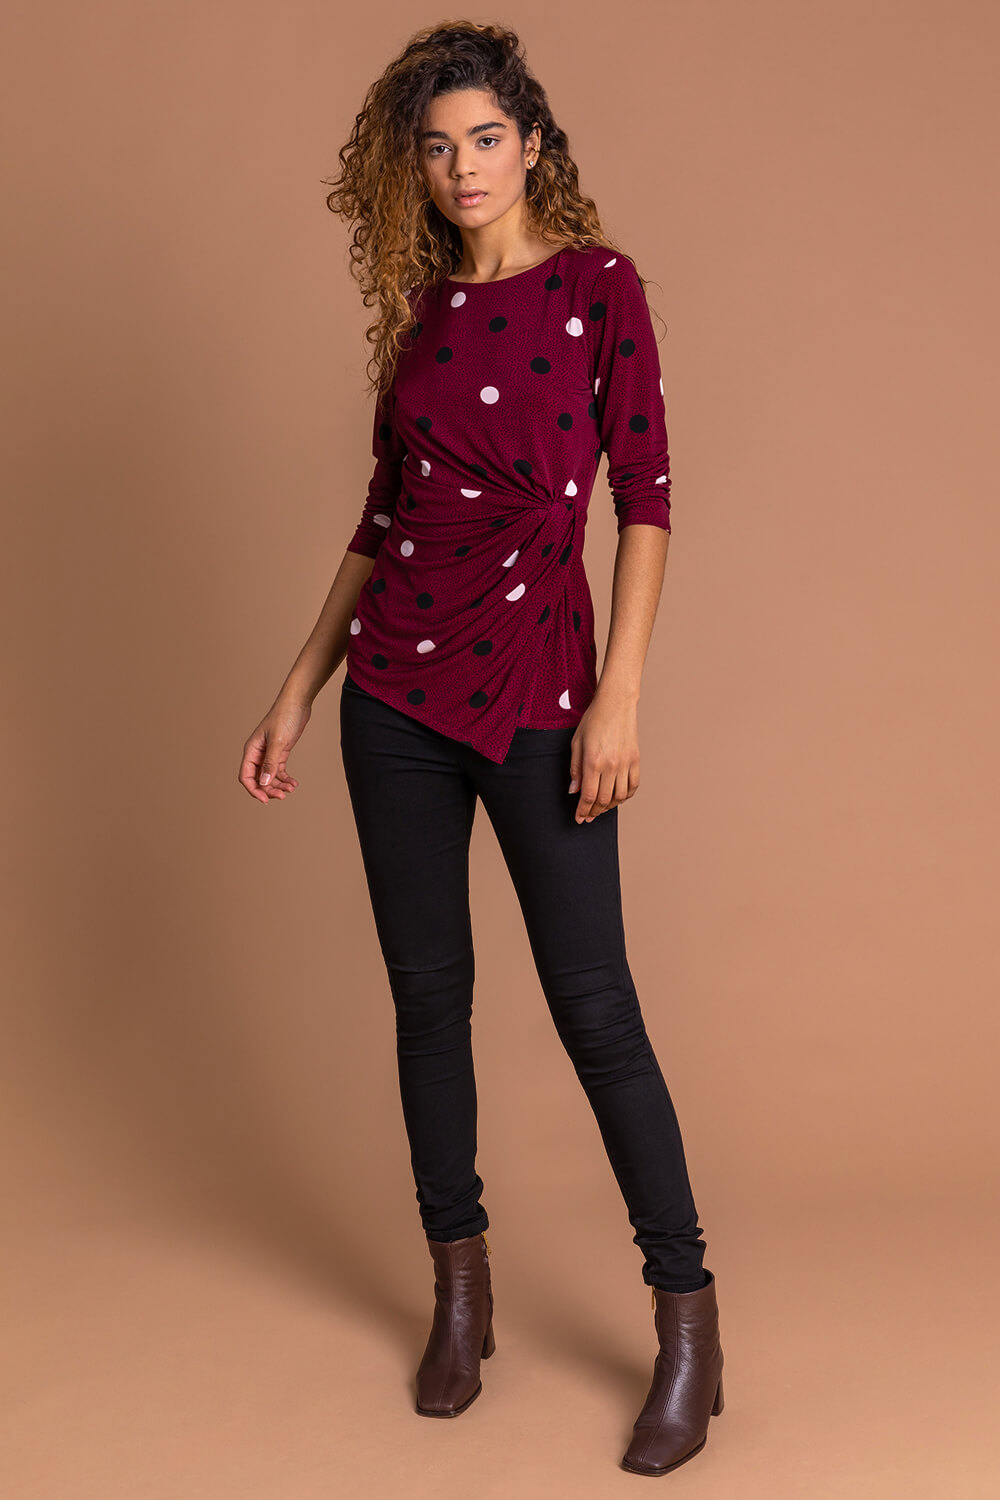 Bordeaux Polka Dot Ruched 3/4 Sleeve Jersey Top, Image 3 of 5